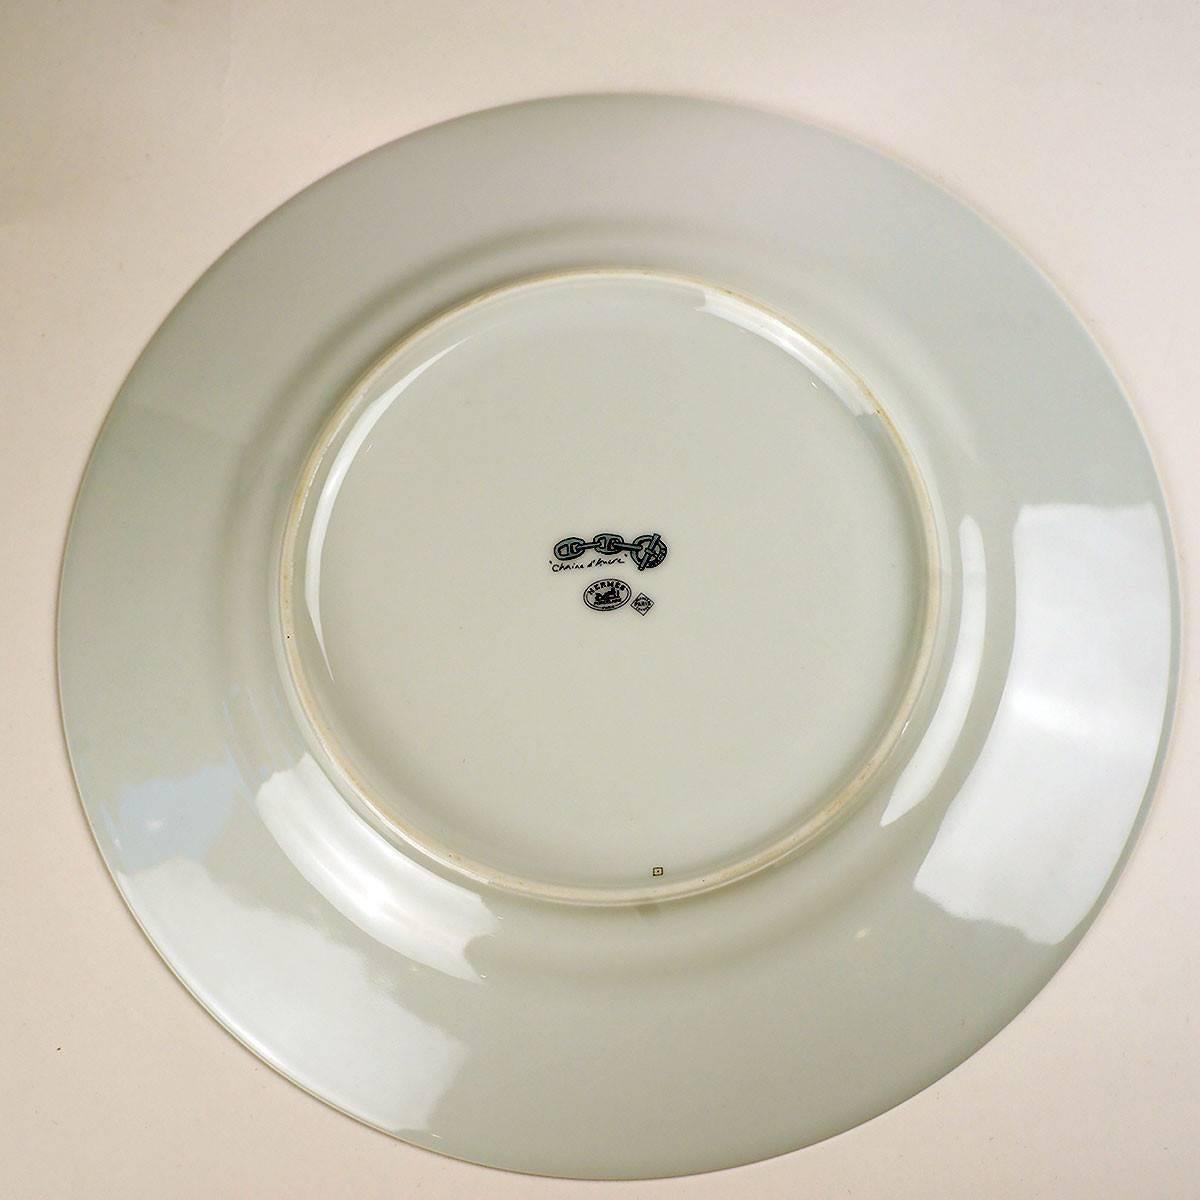 Gray Hermes Chaine d'Ancre Blue Large Dinner Plates, Set of Six